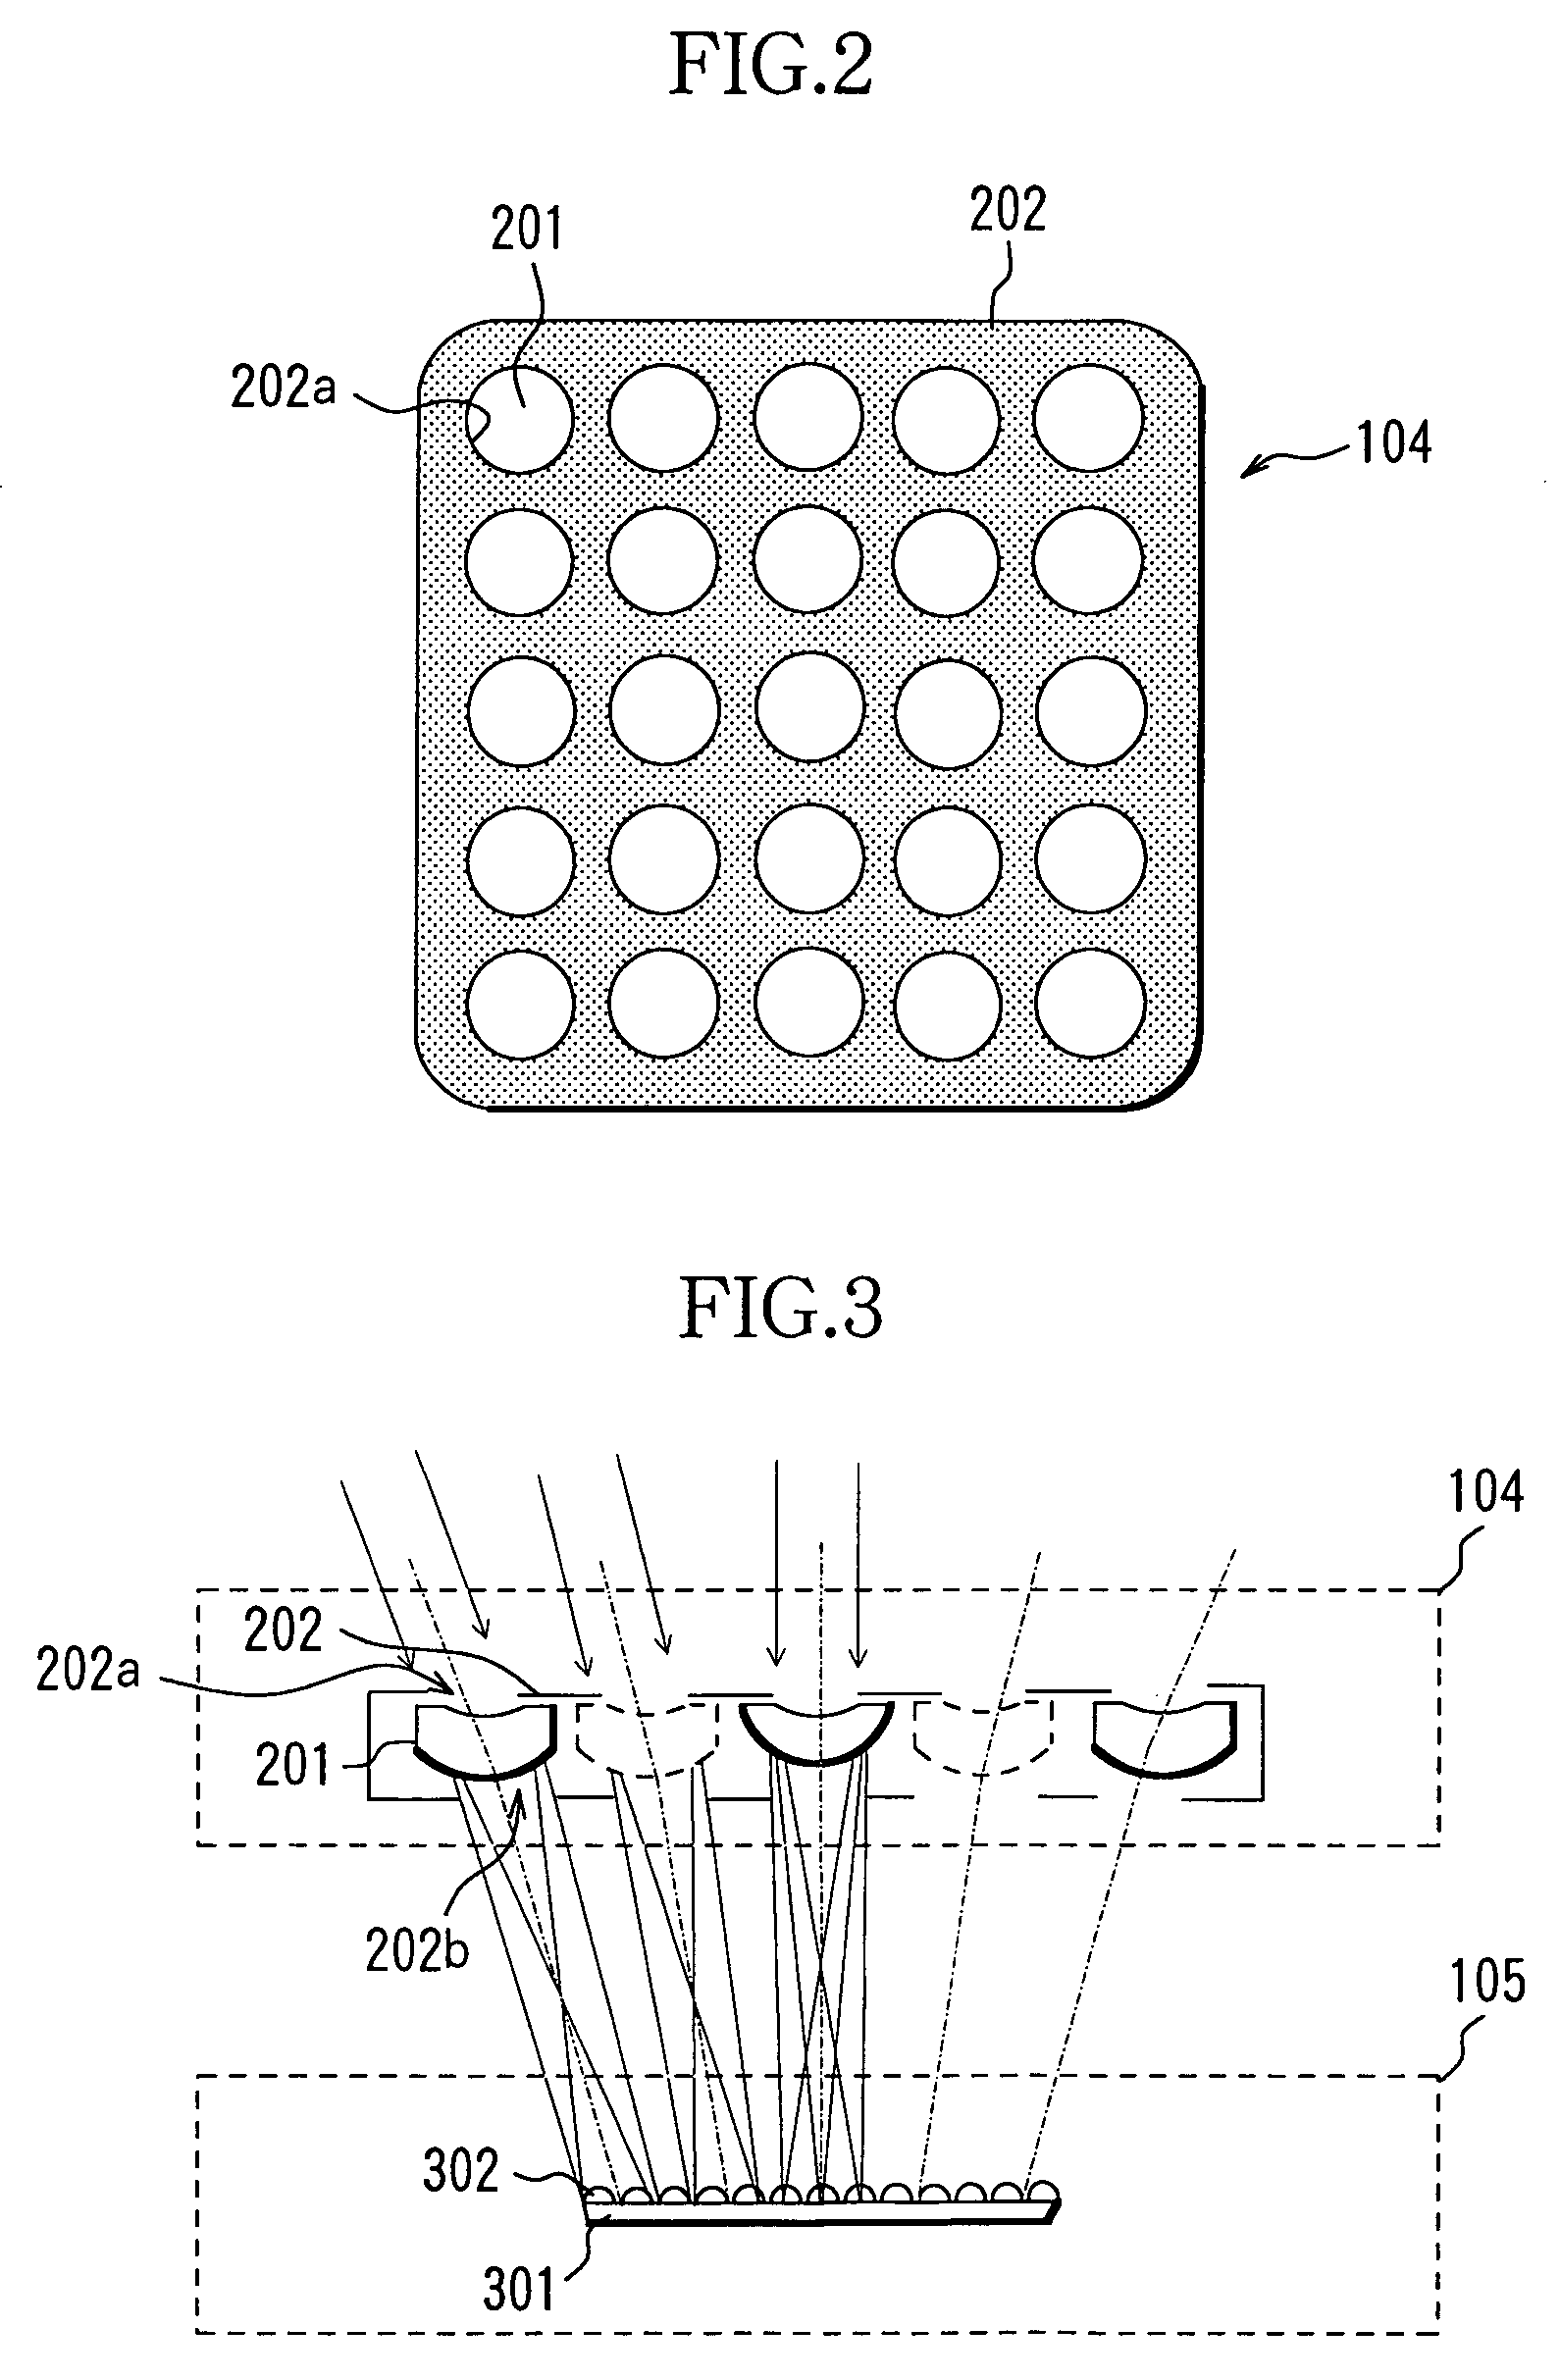 Image-taking apparatus and monitoring system